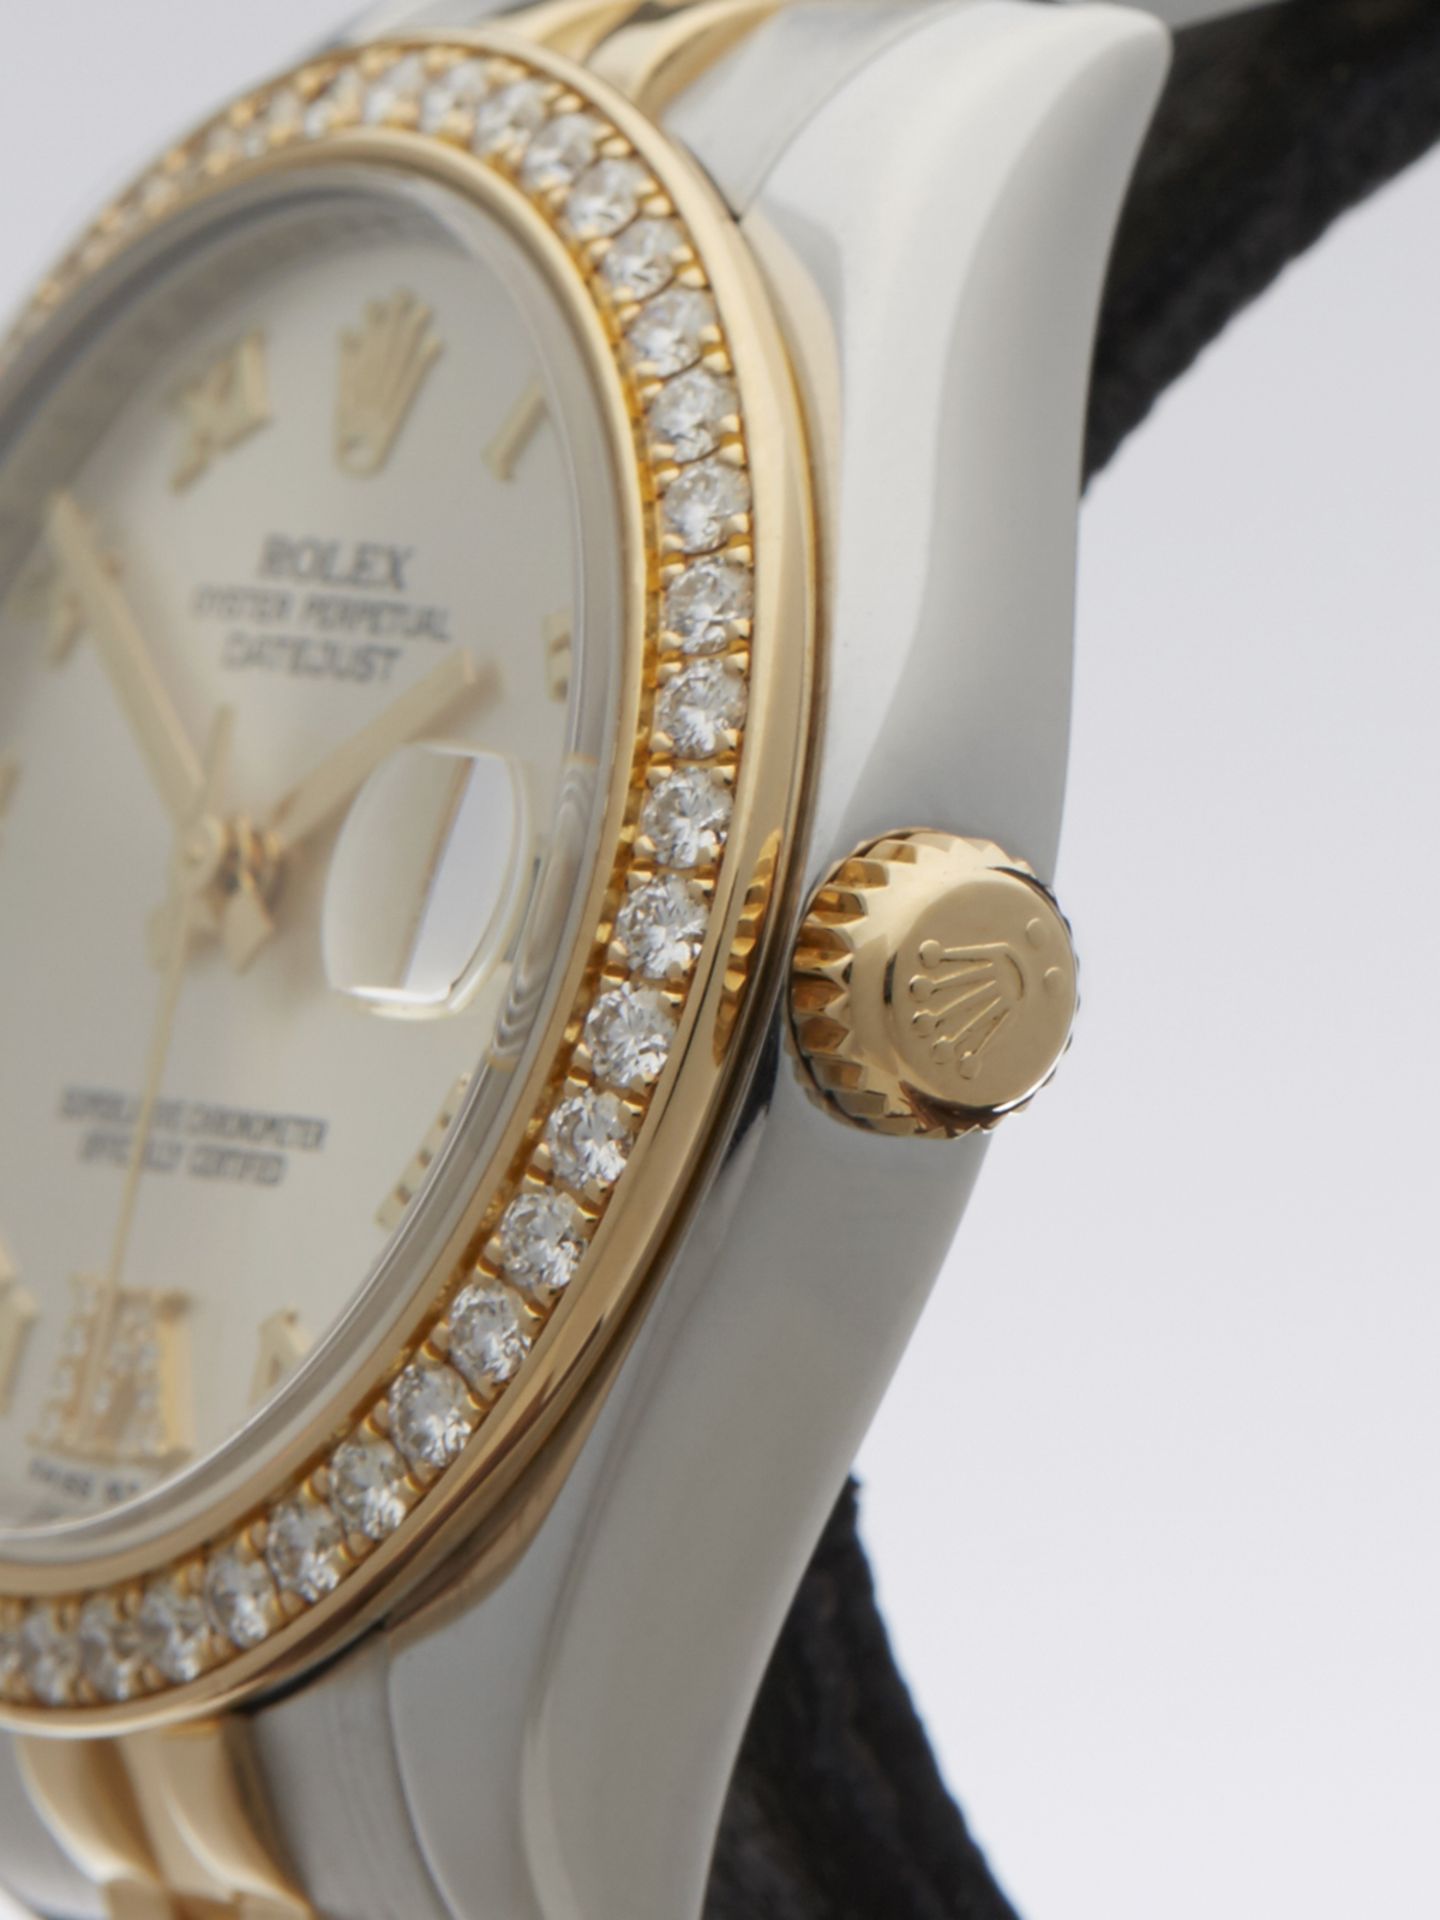 Rolex Datejust Original Diamond Bezel and Dial 31mm Stainless Steel/18k Yellow Gold 178383 - Image 4 of 11